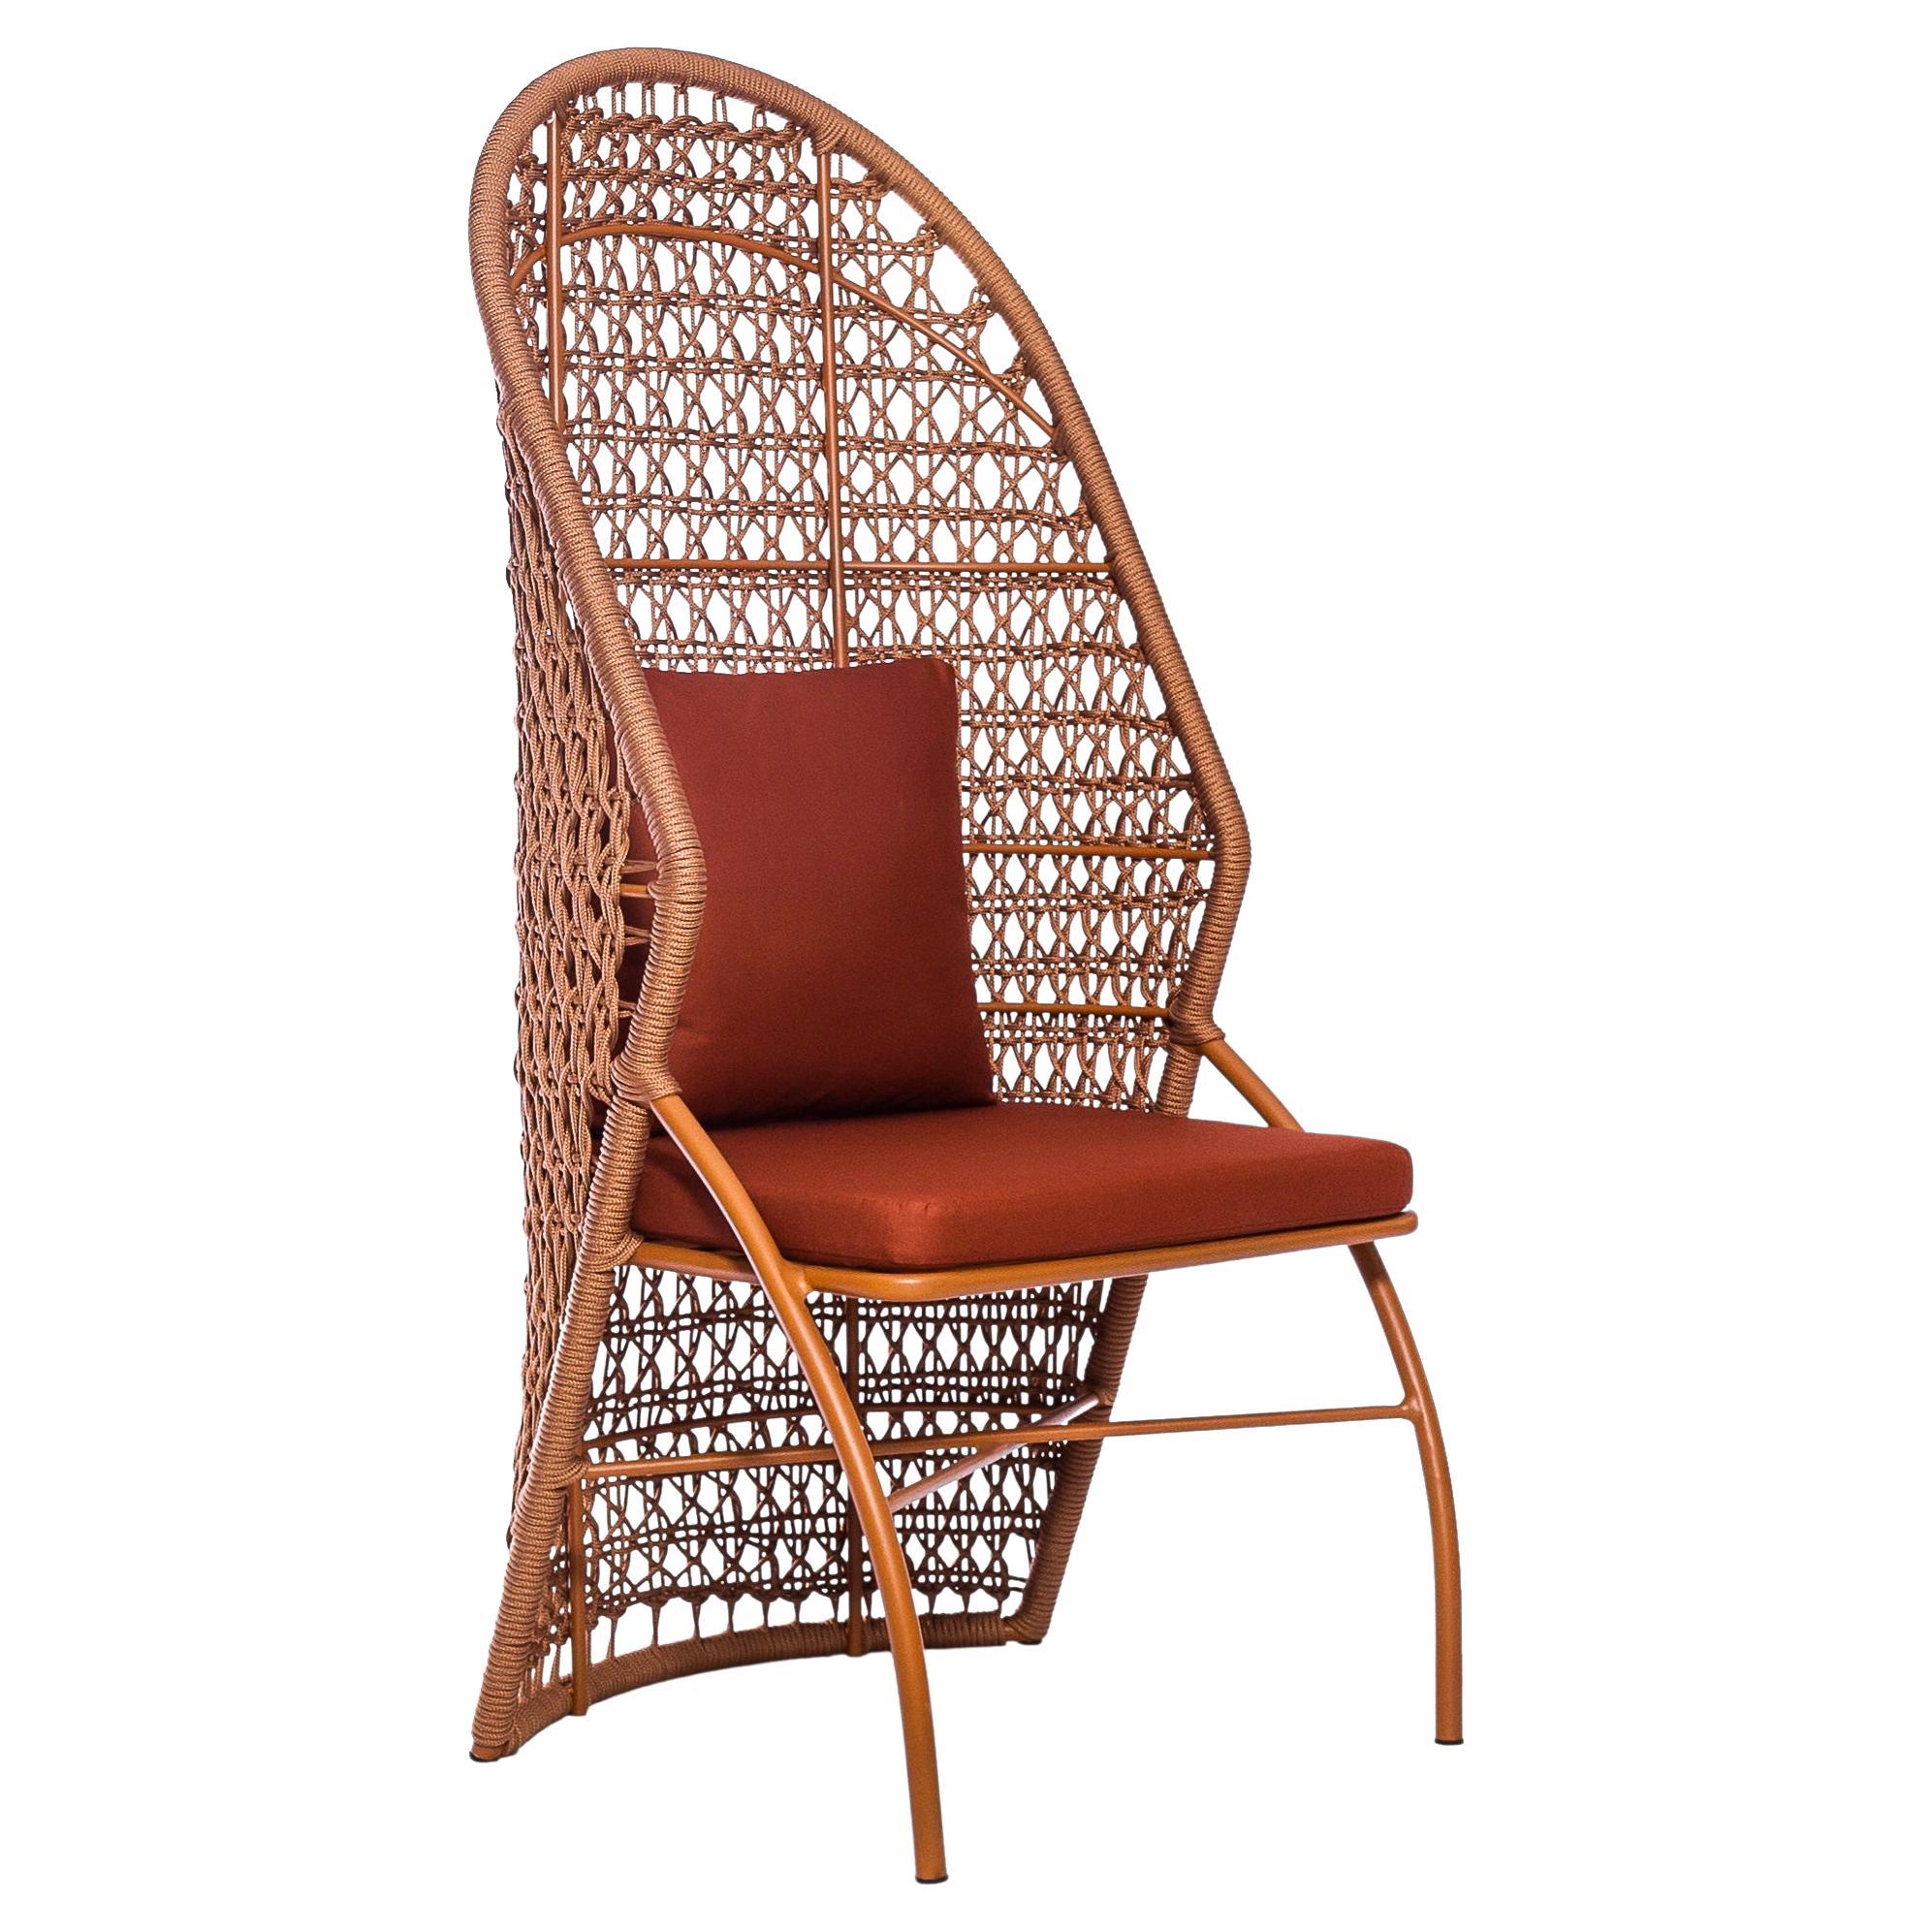 "Belize" Outdoor Chair in Aluminum and Naval Rope Handmade